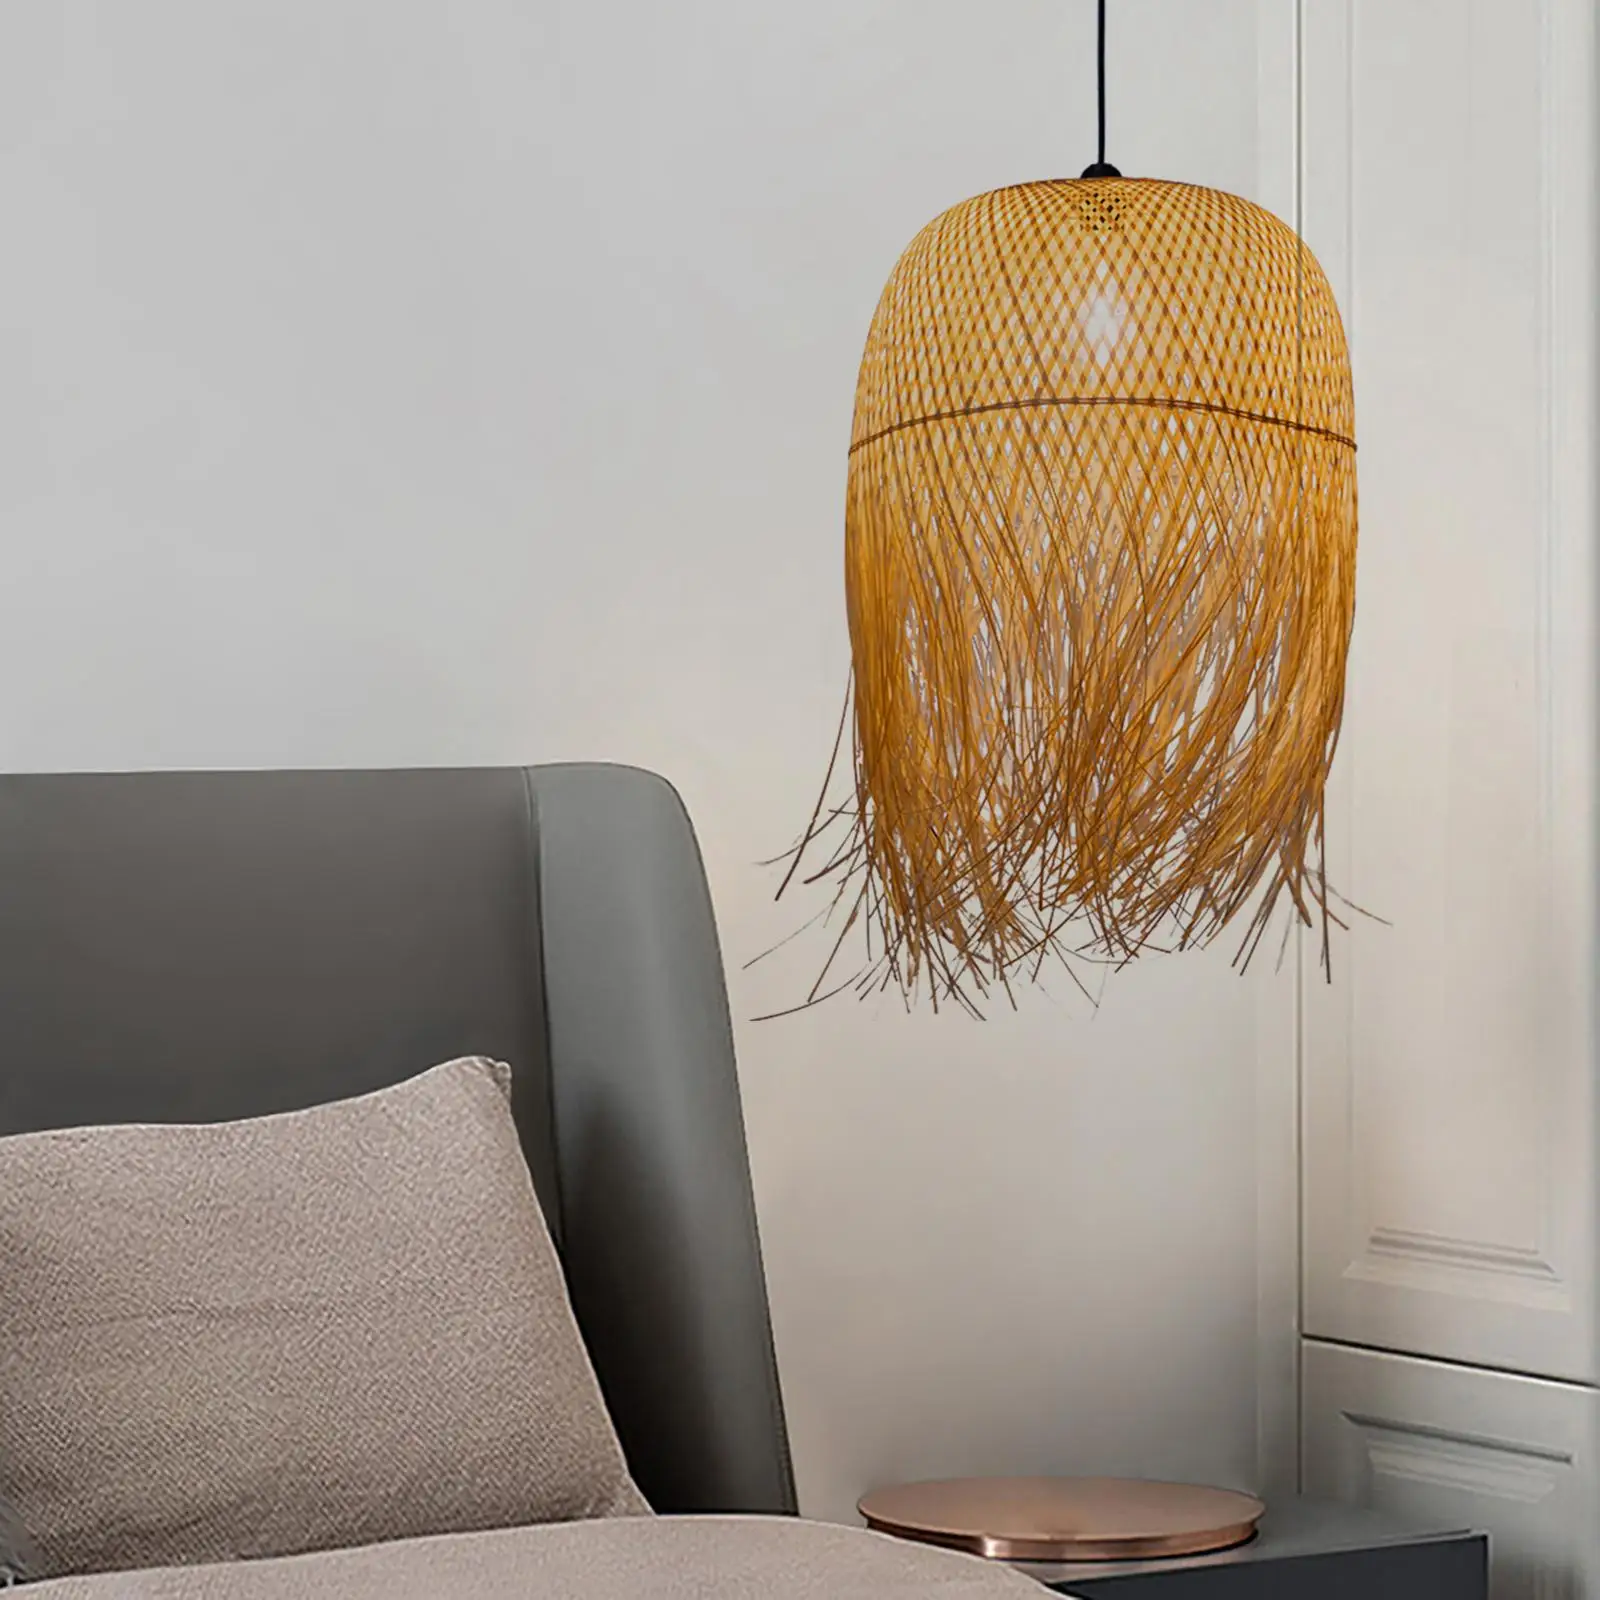 Hand Woven Bamboo Pendant Light Decorative Hanging for Apartment Hotel